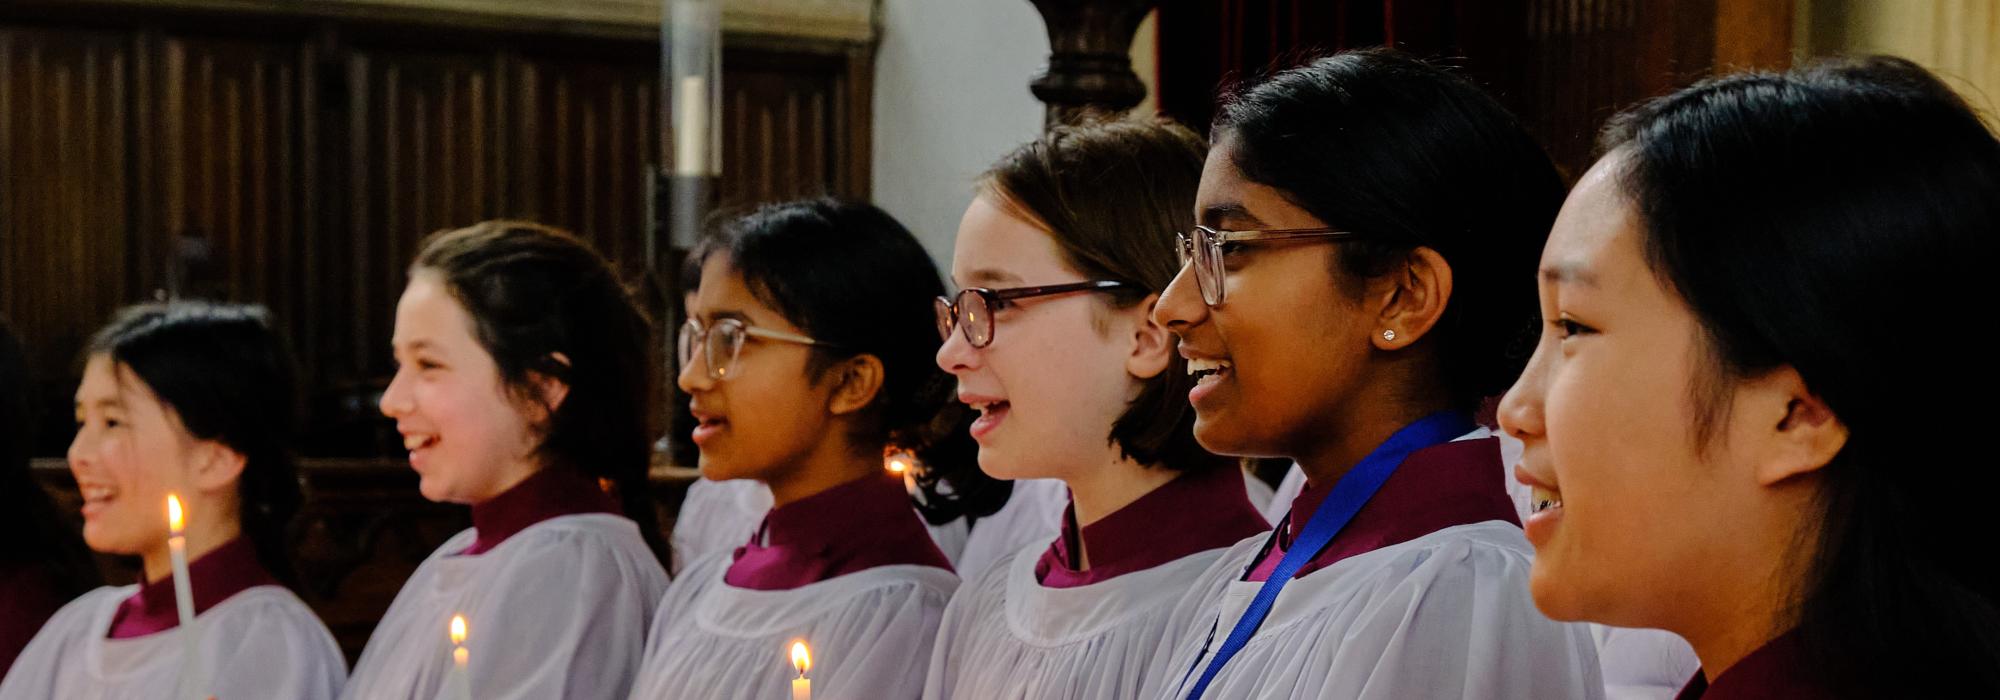 Girl Choristers lit by handheld candles